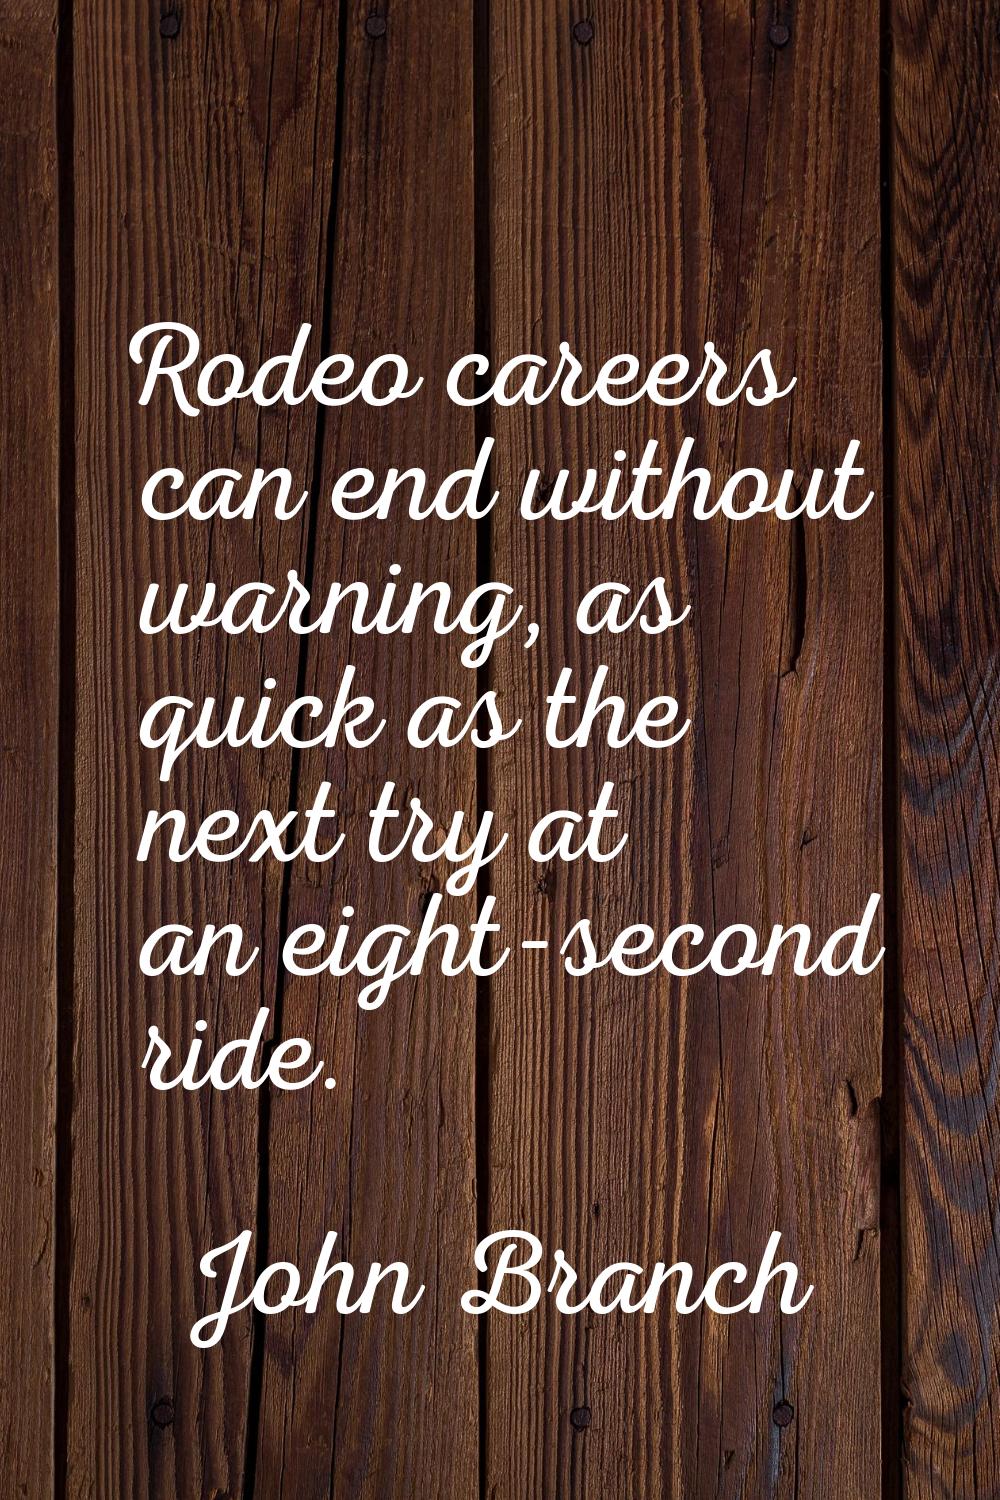 Rodeo careers can end without warning, as quick as the next try at an eight-second ride.